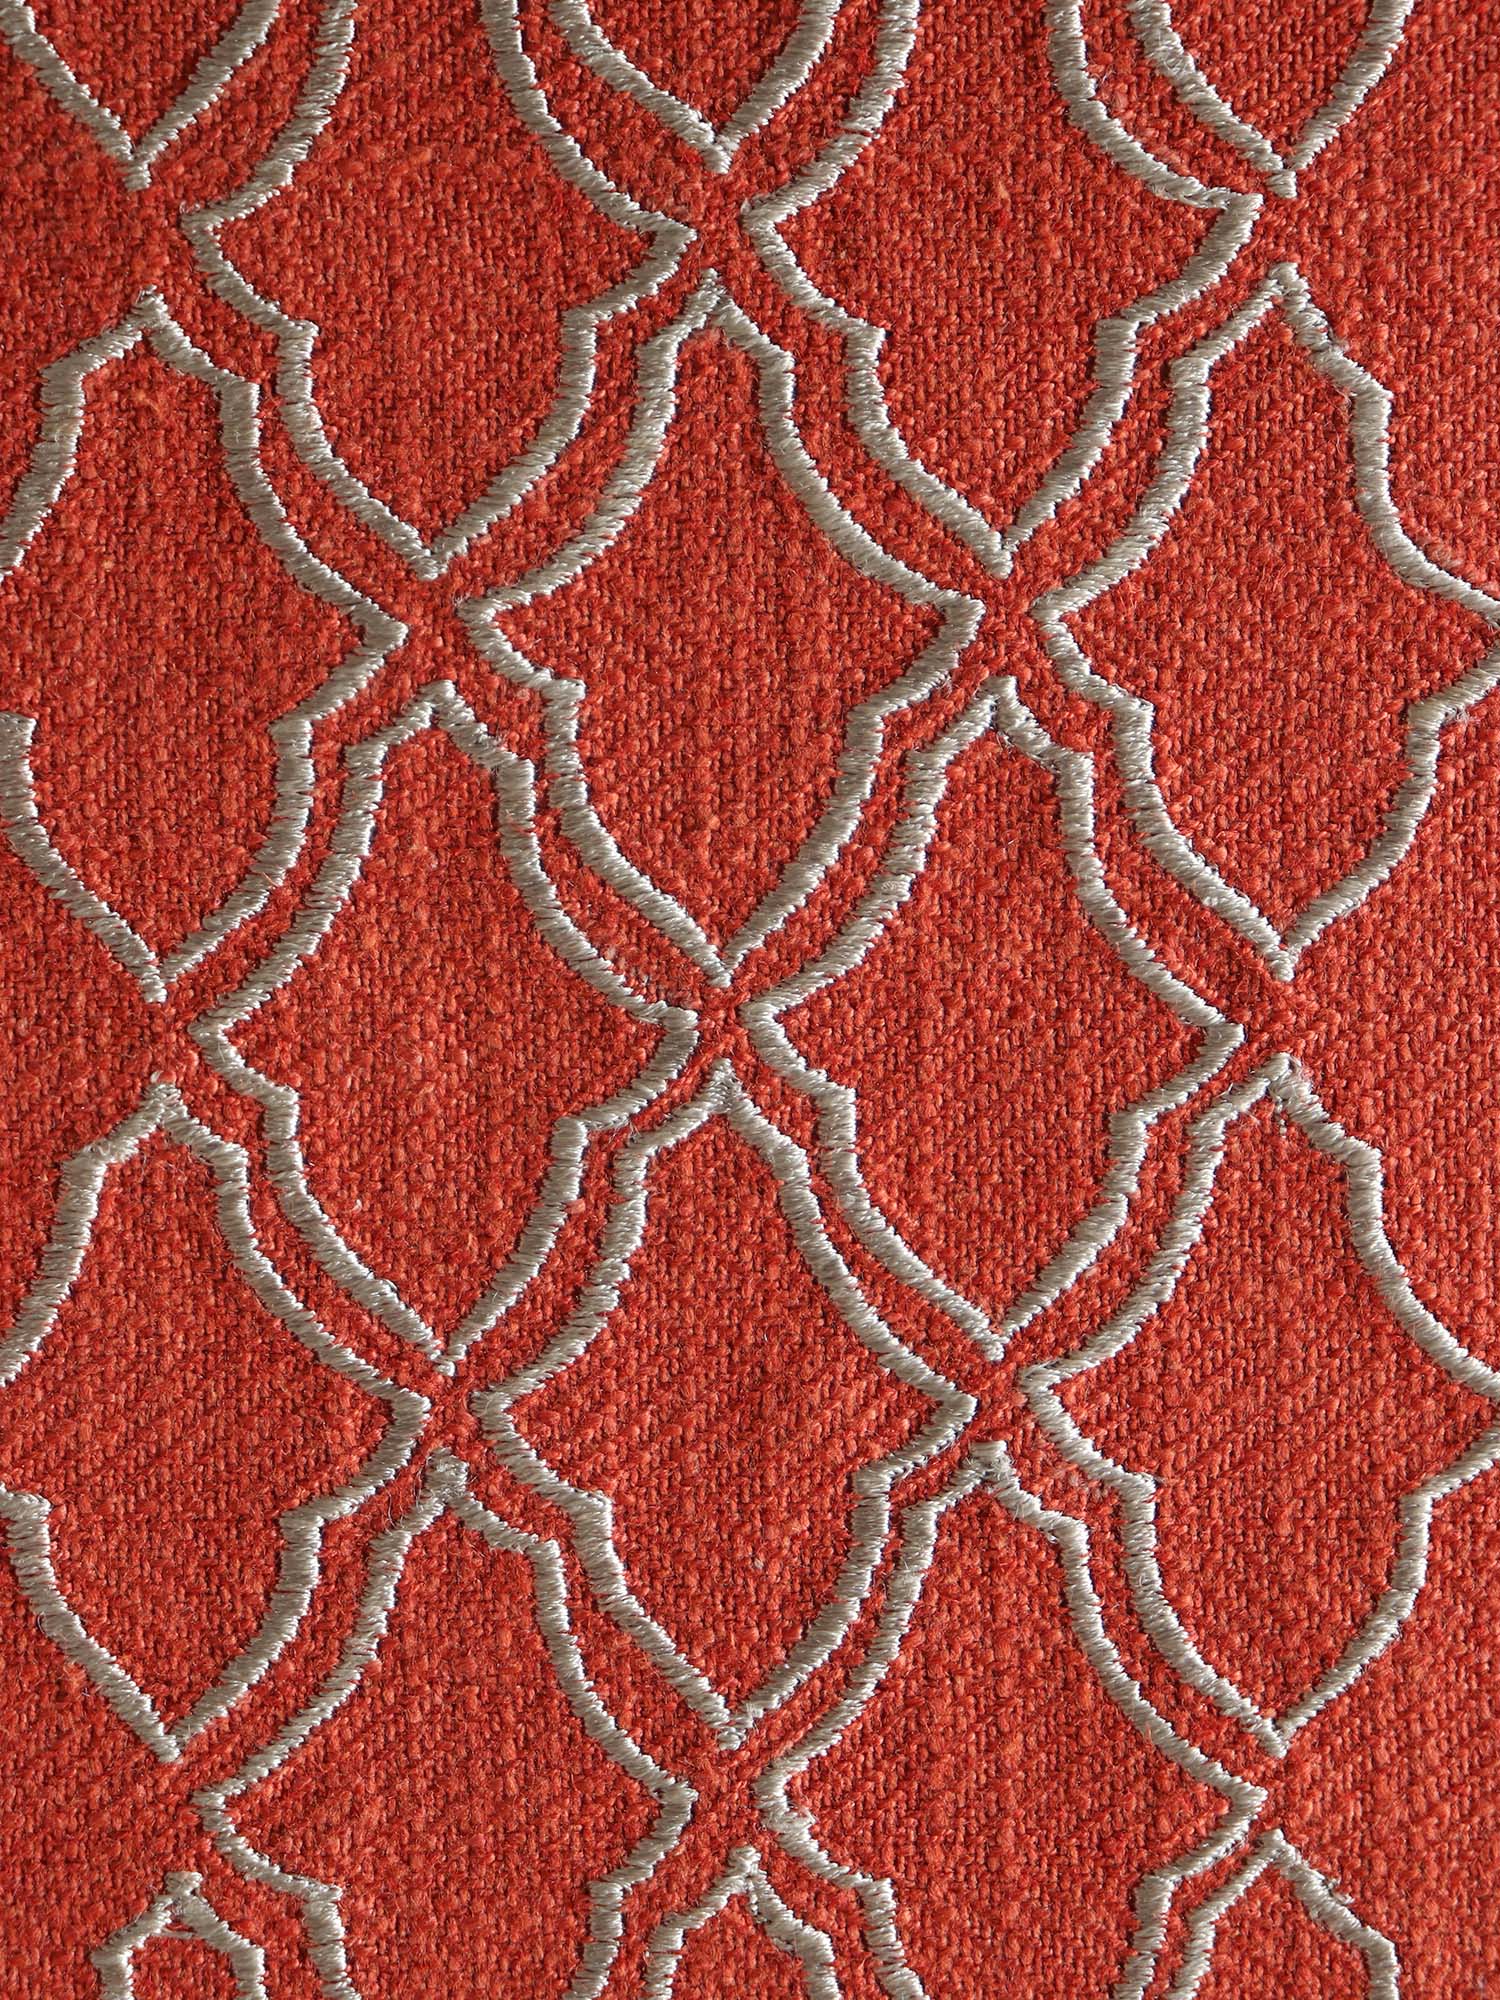 closeup of embroidered dinner table placemats in rust and beige contrast colors - 13x19 inch 